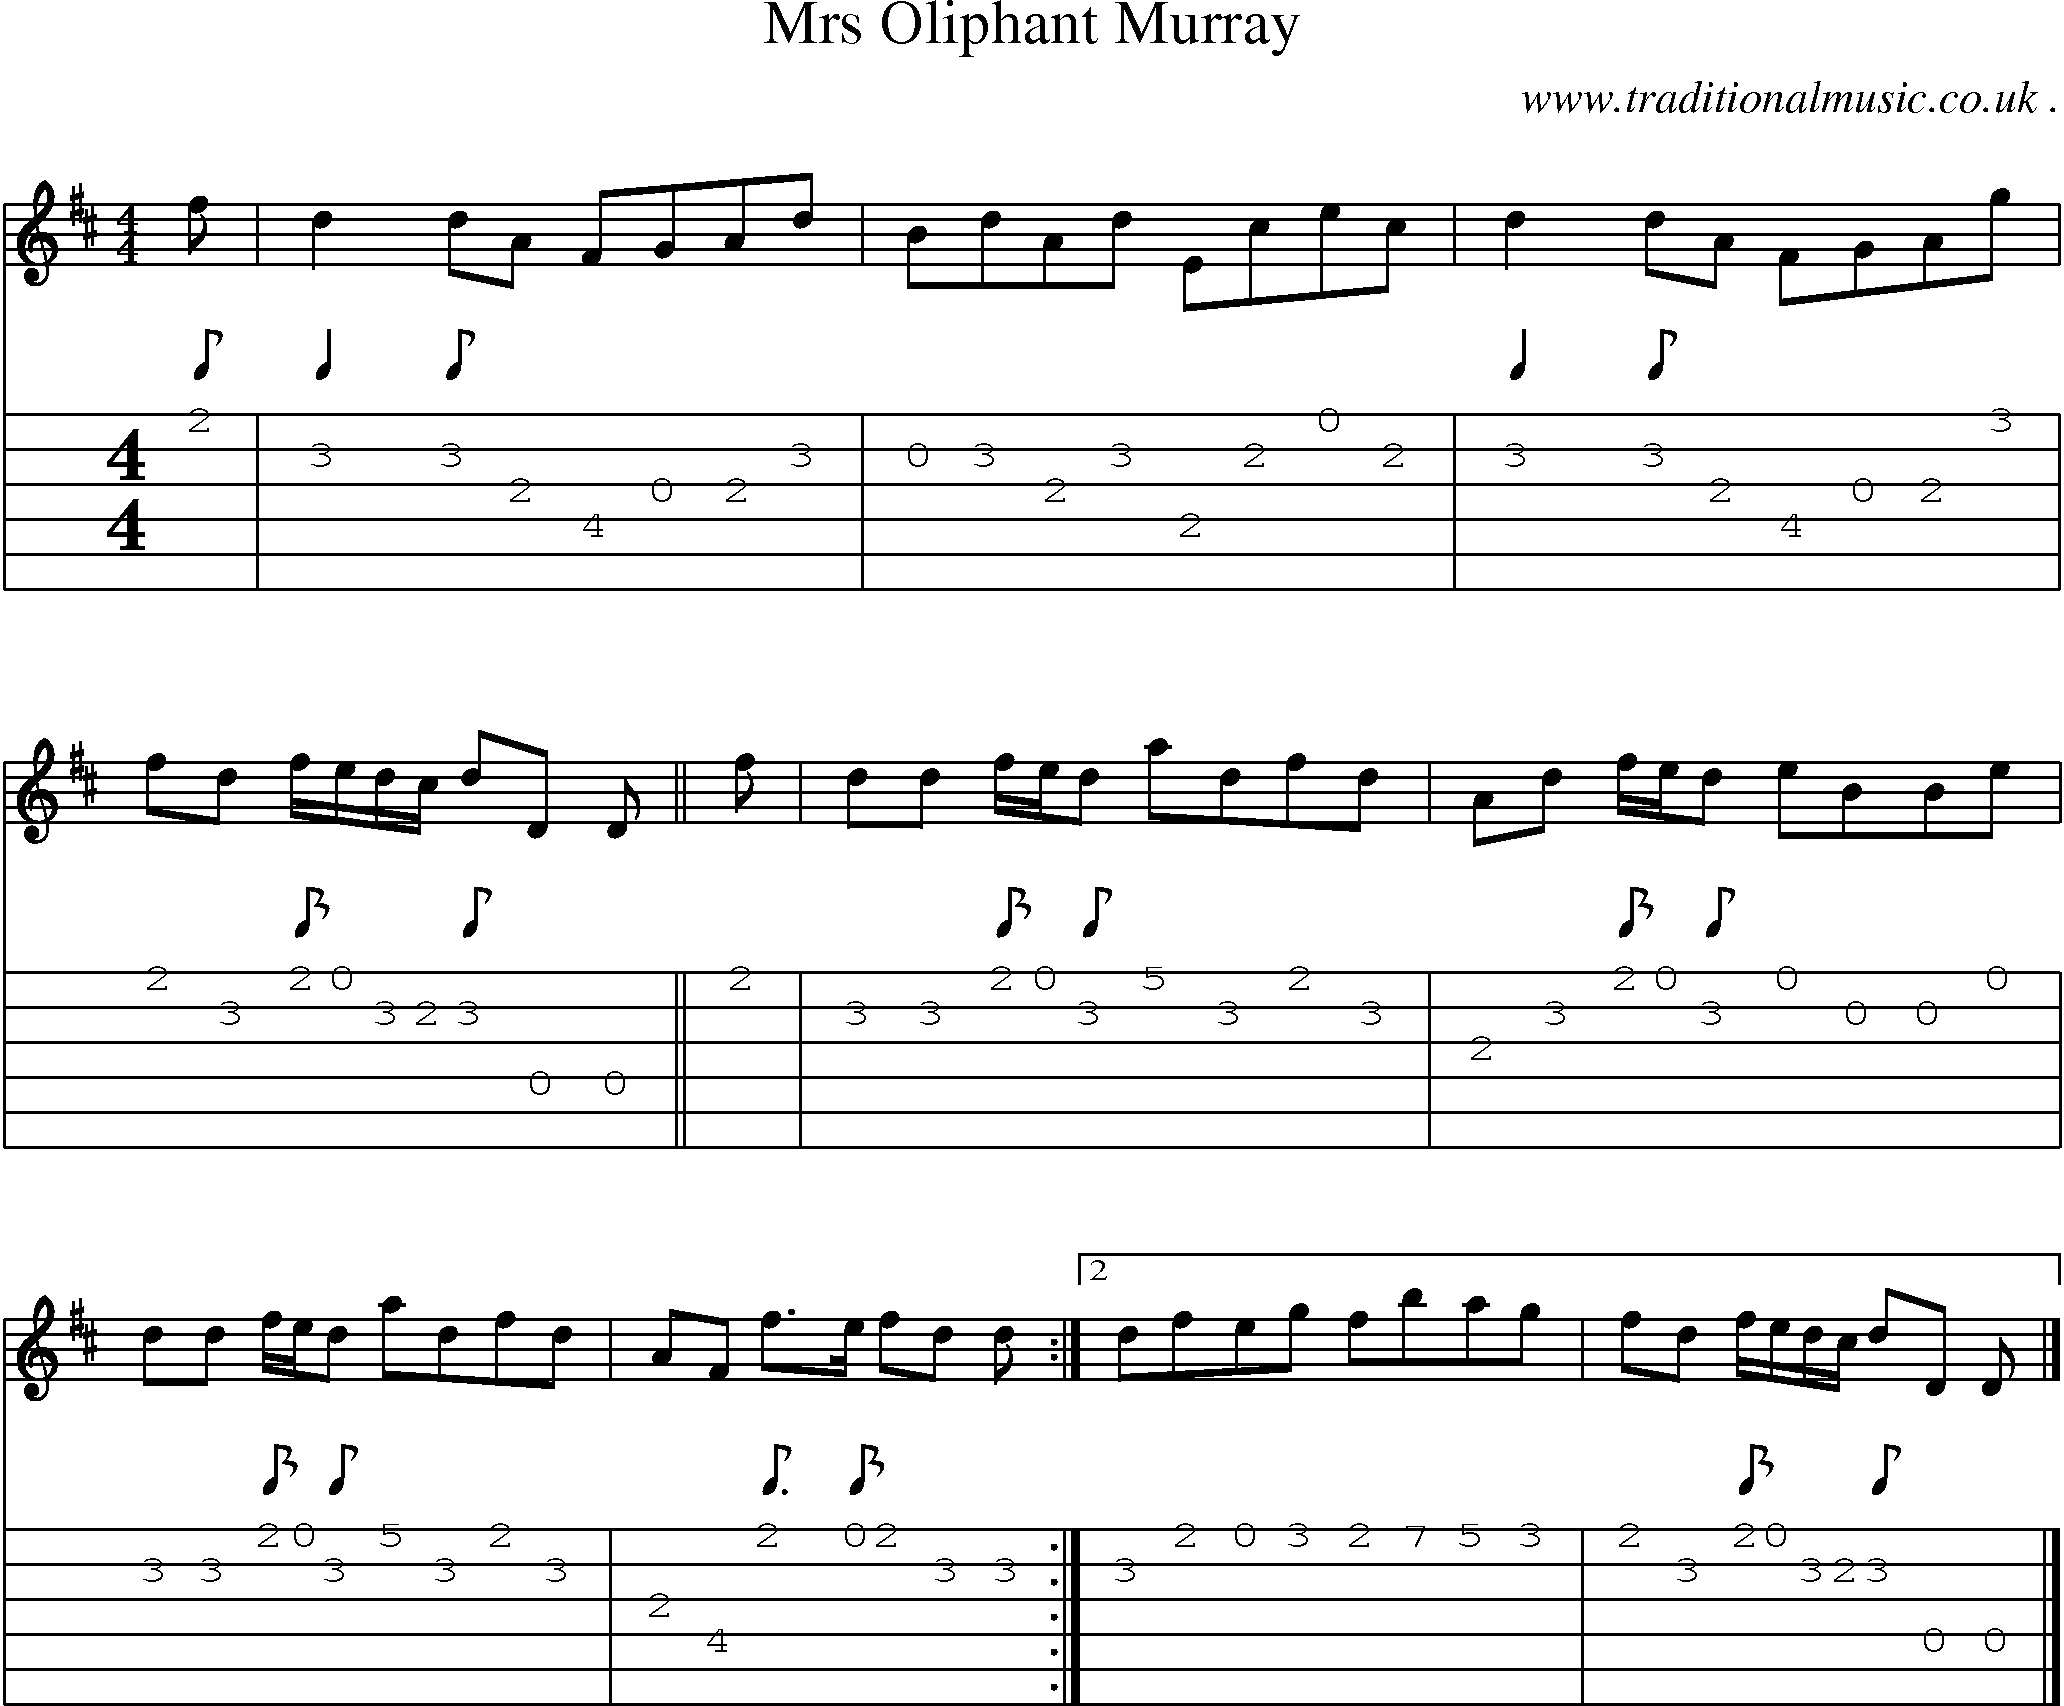 Sheet-music  score, Chords and Guitar Tabs for Mrs Oliphant Murray